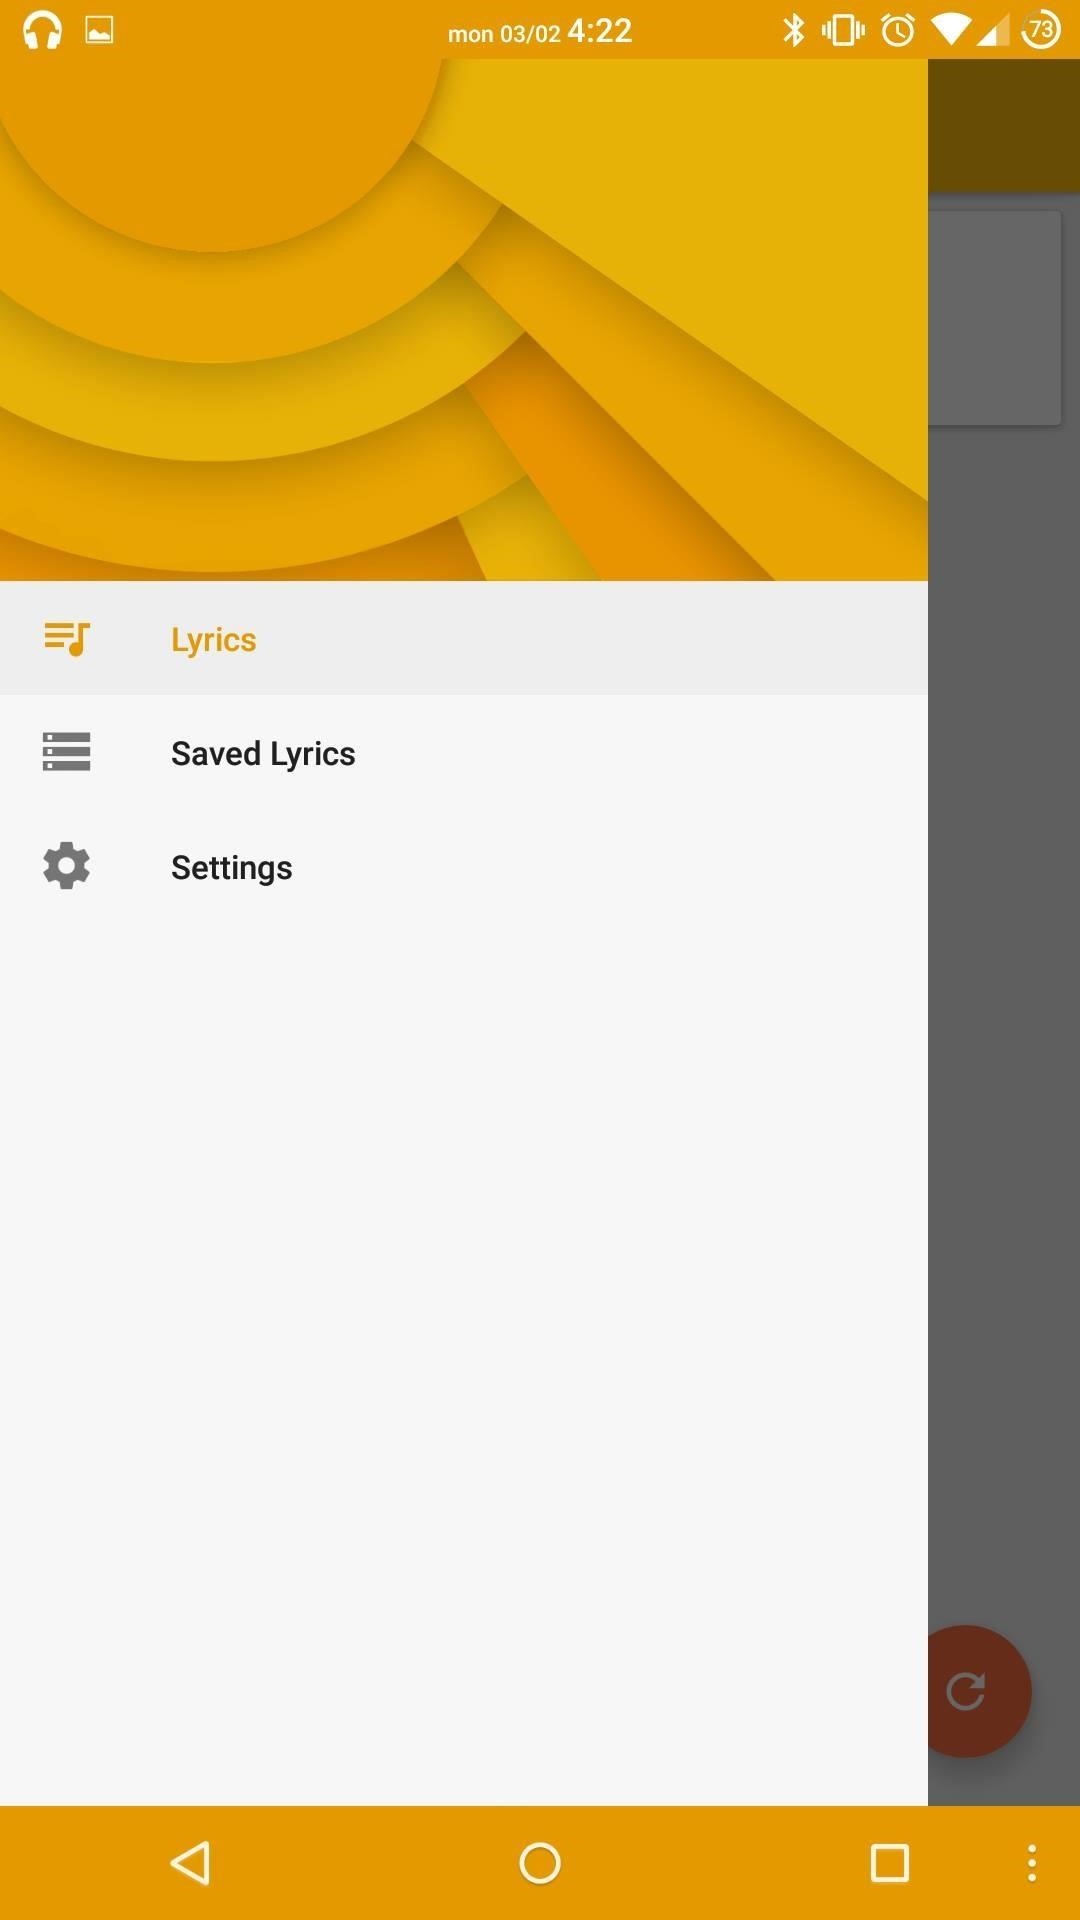 Instantly Get Song Lyrics on Android with QuickLyric